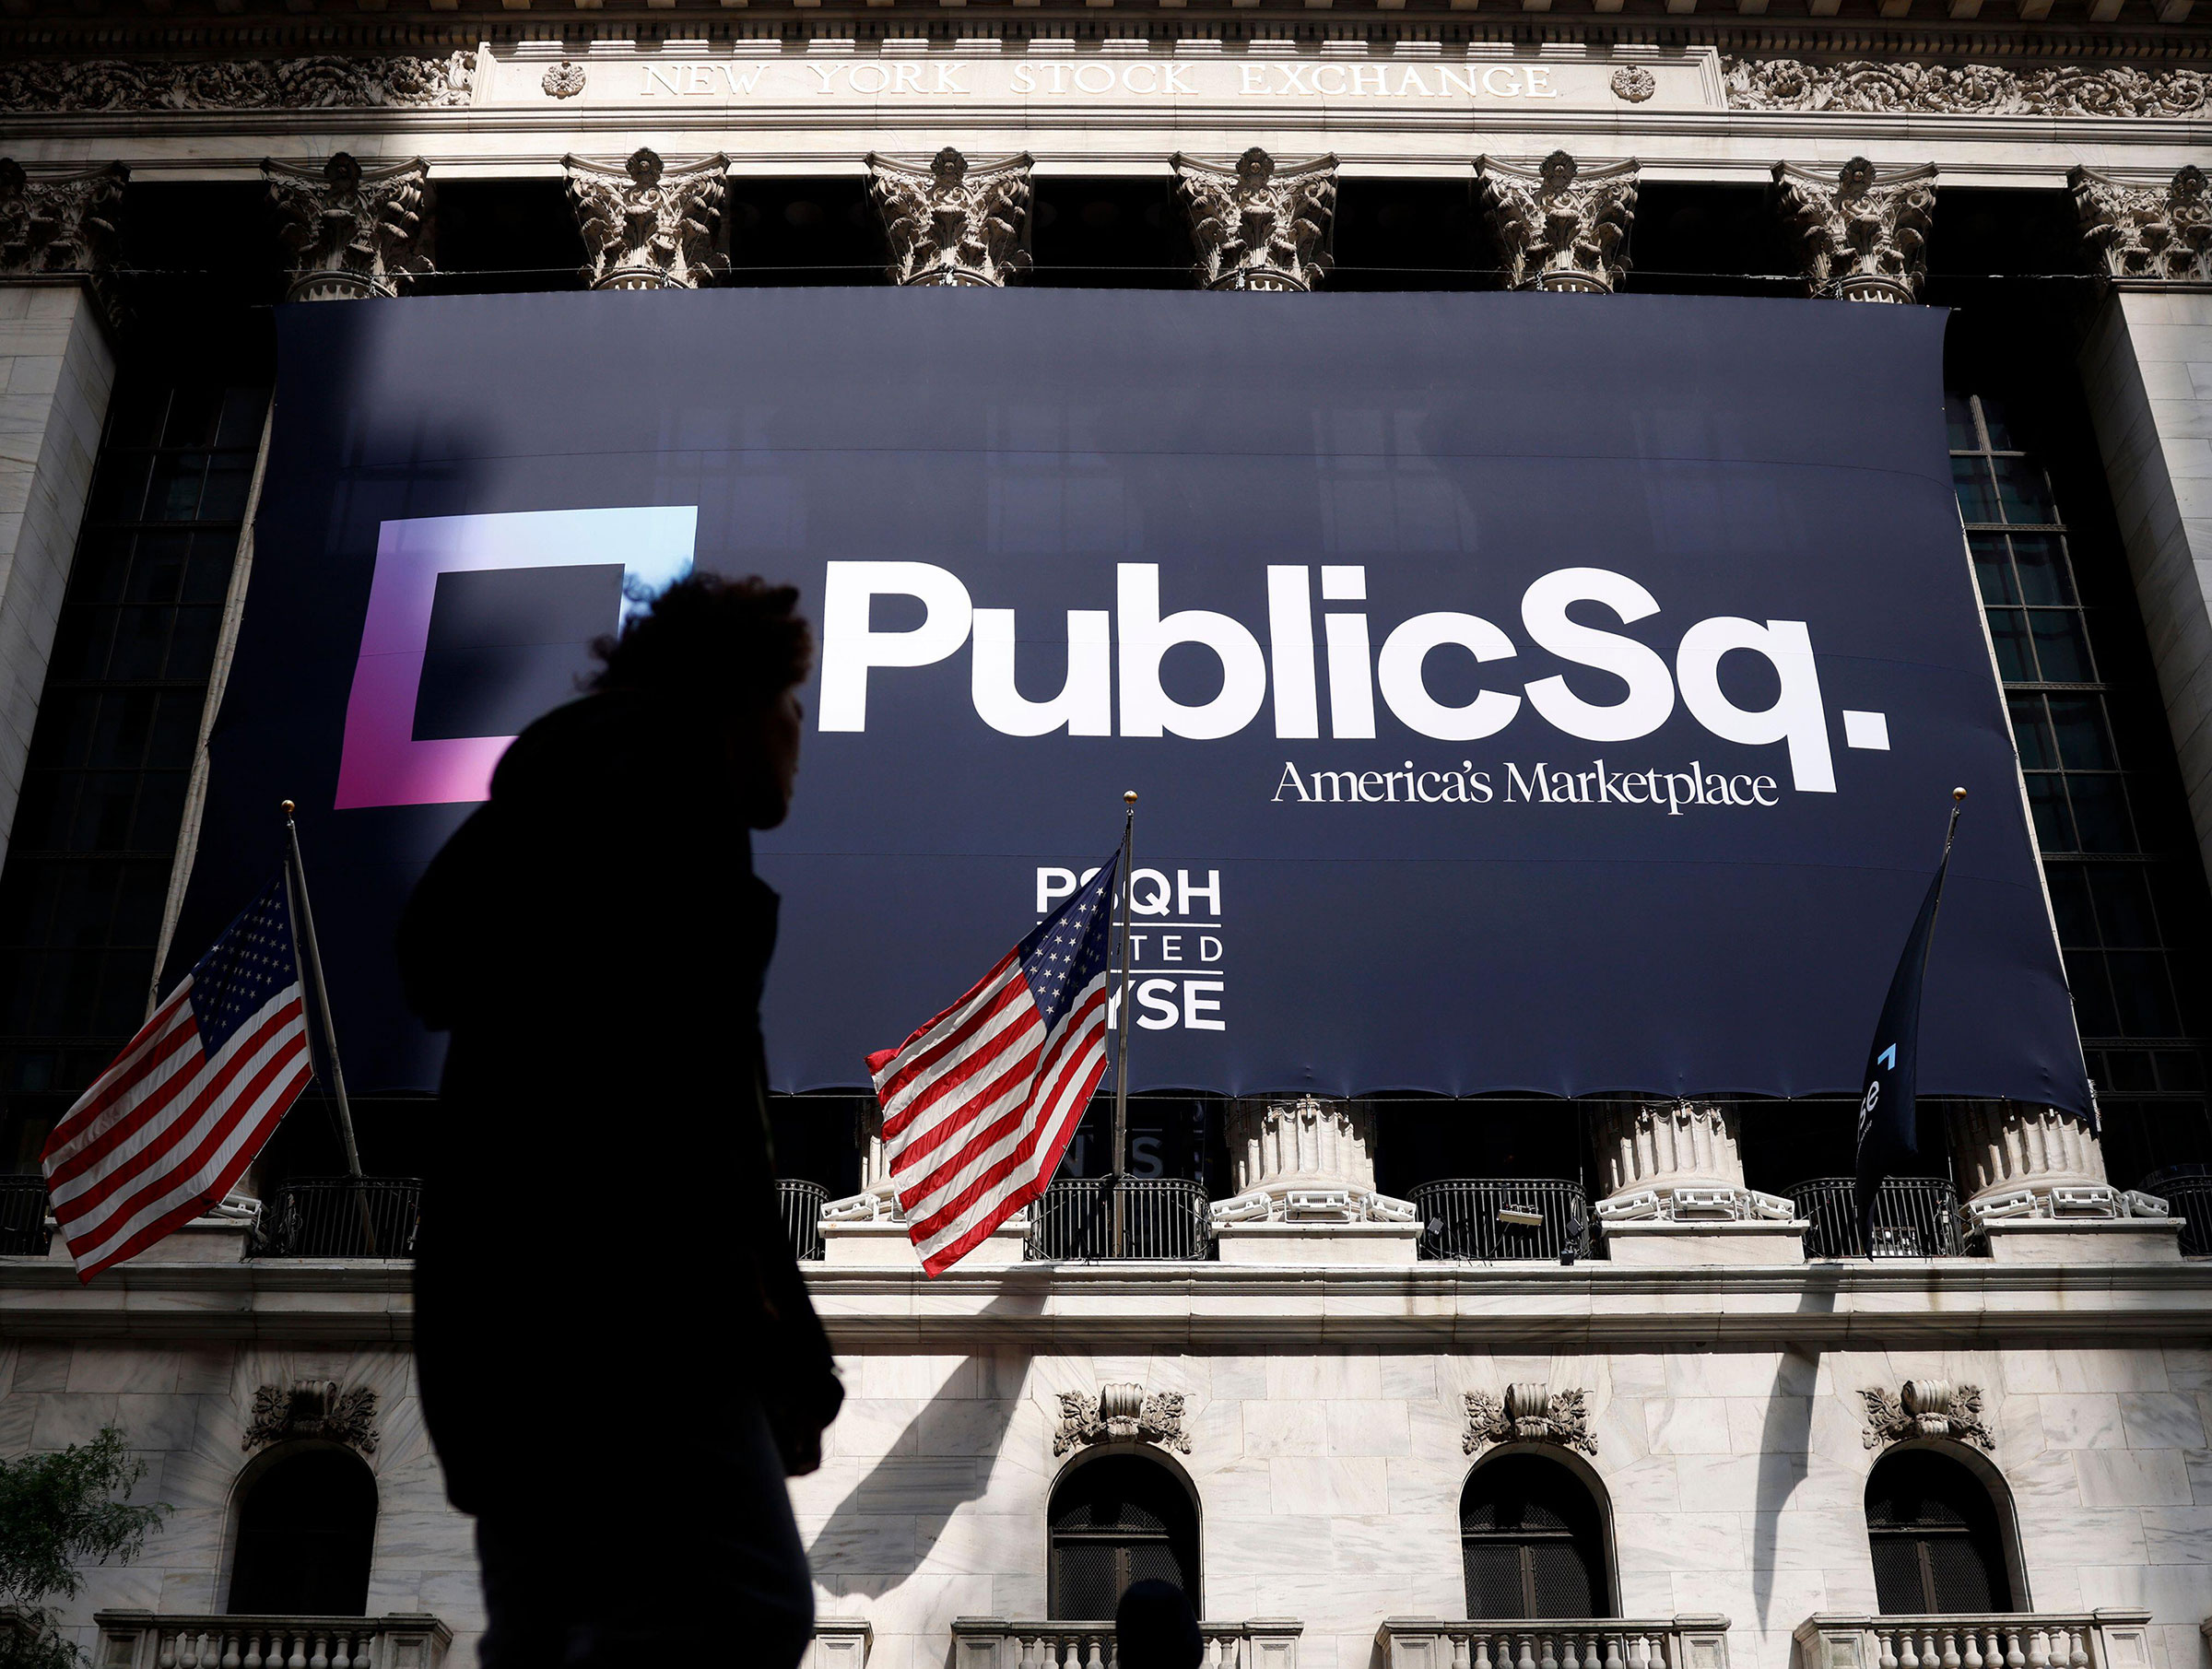 The PublicSq. brand logo hangs outside at the NYSE before the opening bell at the New York Stock Exchange on Wall Street in New York City on Thursday, July 20, 2023